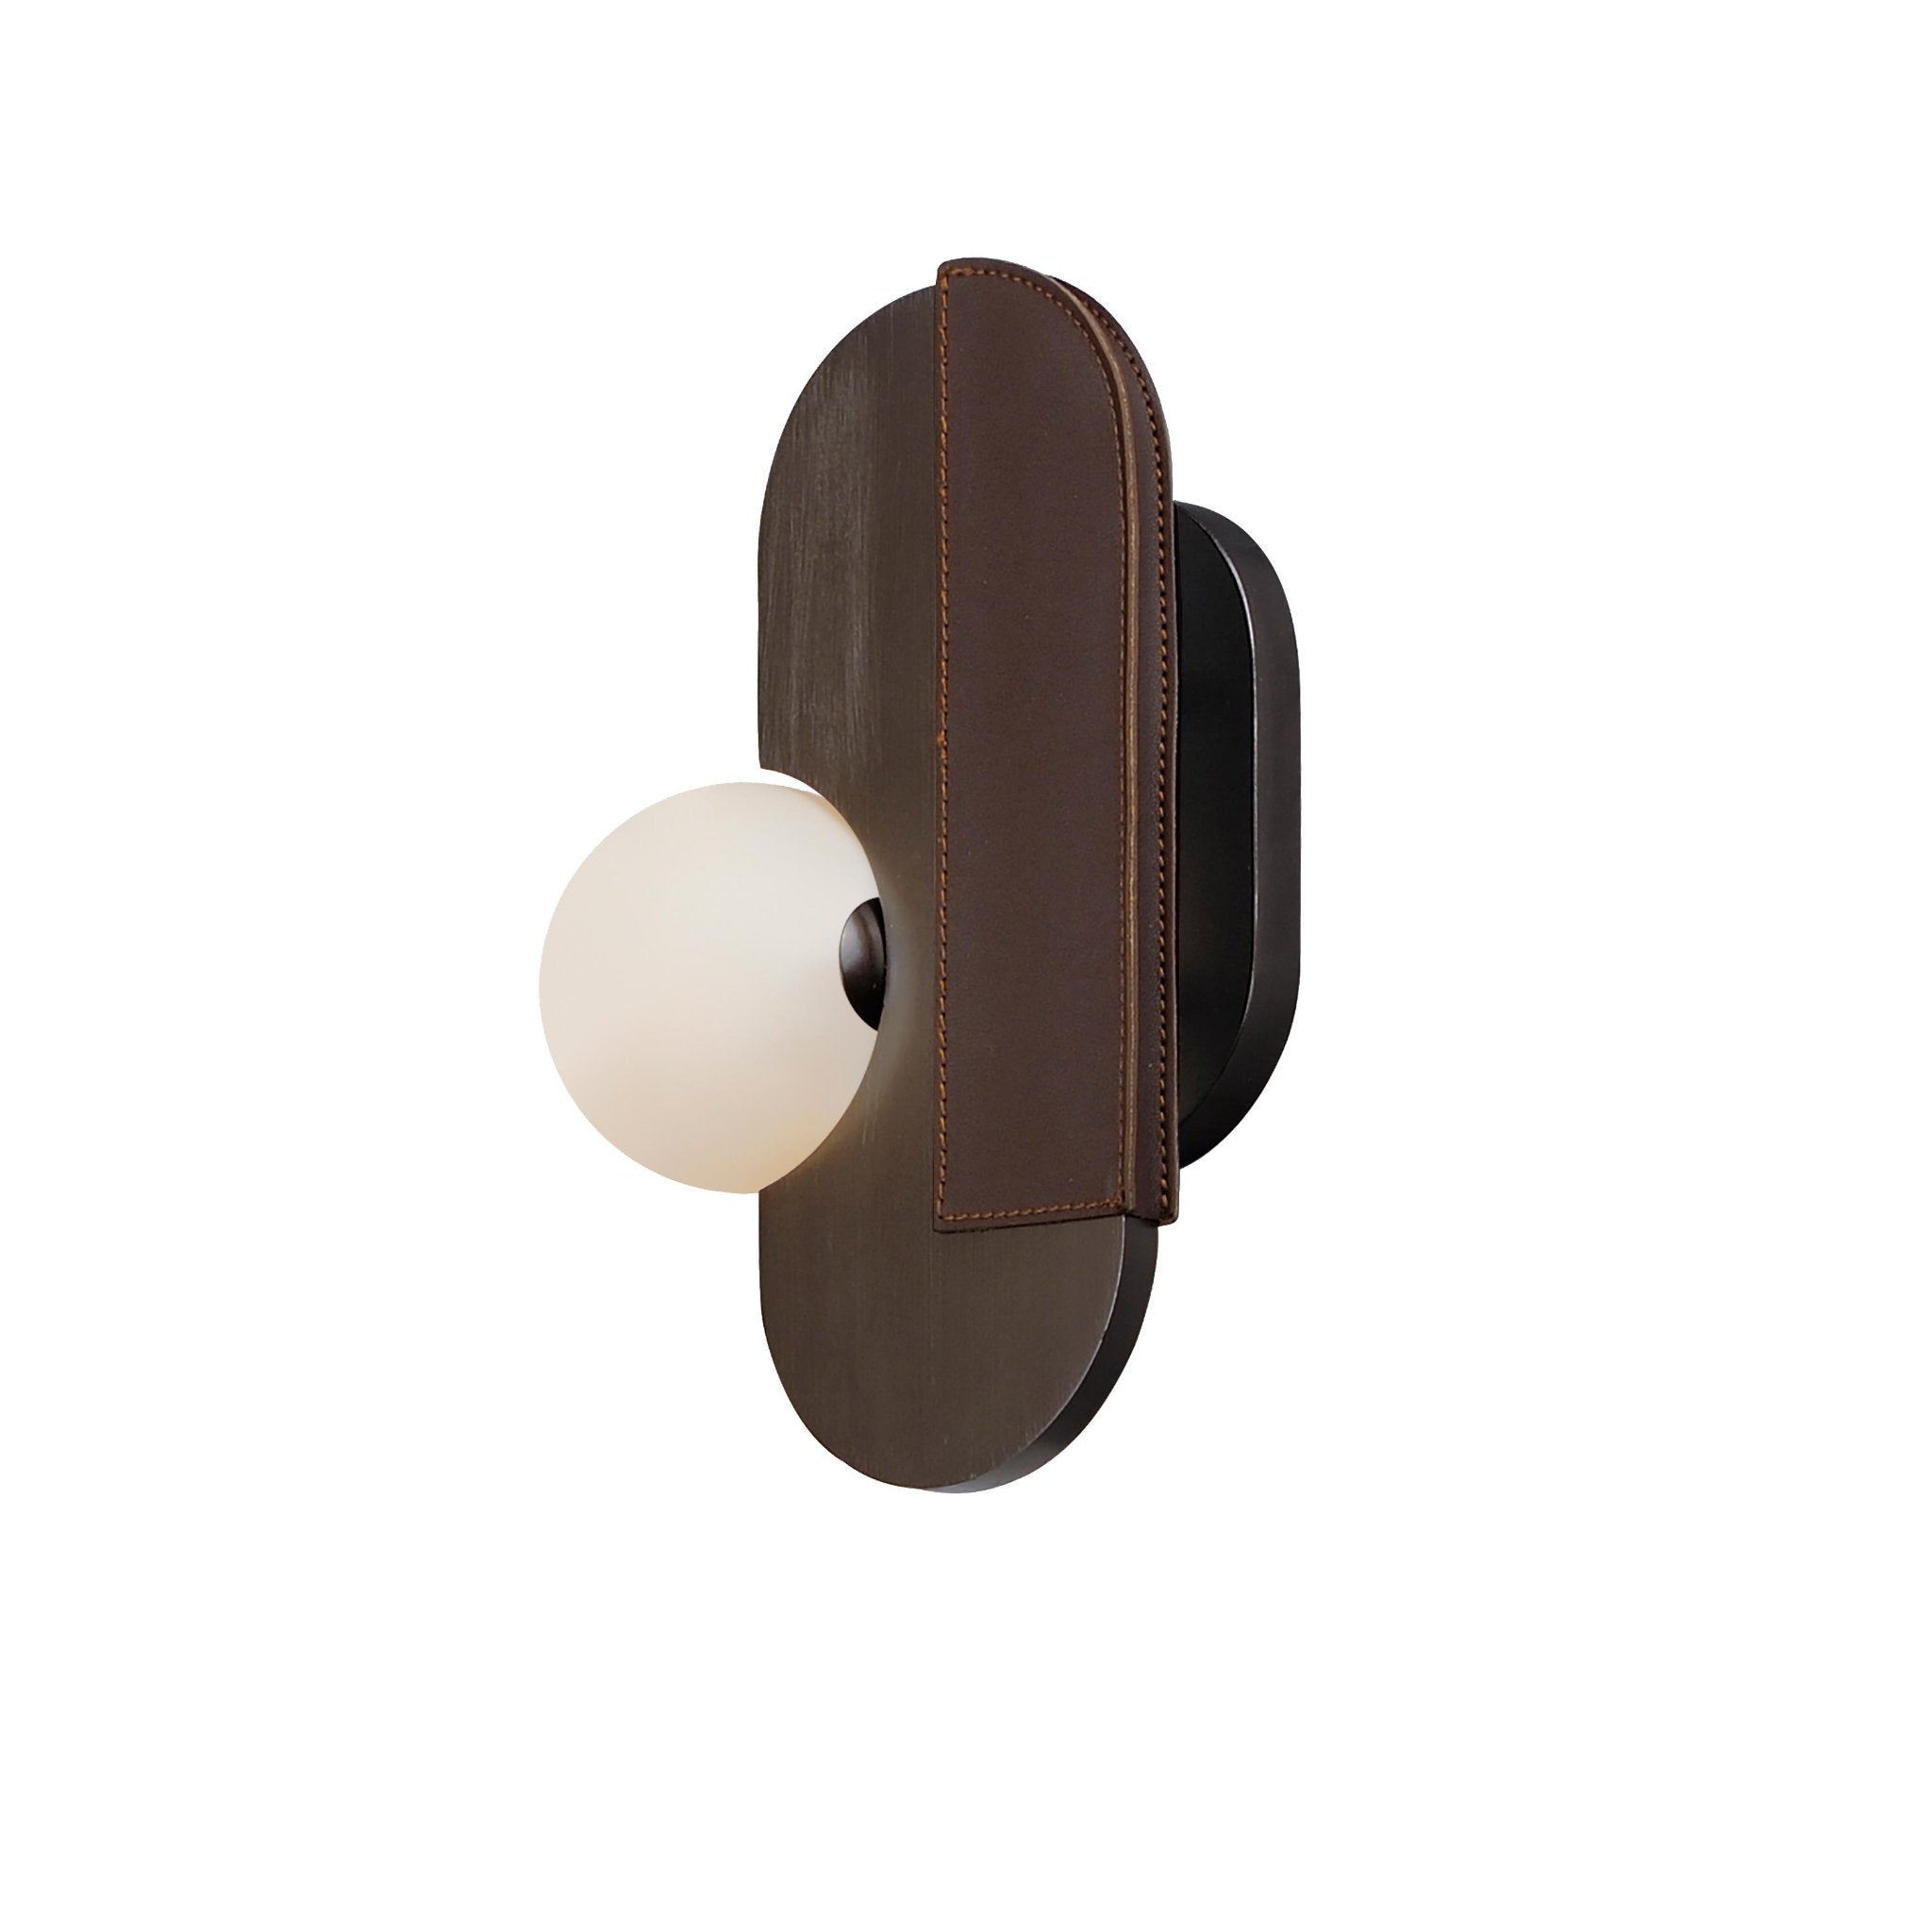 Studio M SM24600BBZ Stitched Side-Light Wall Sconce in Brushed Bronze by Nina Magon